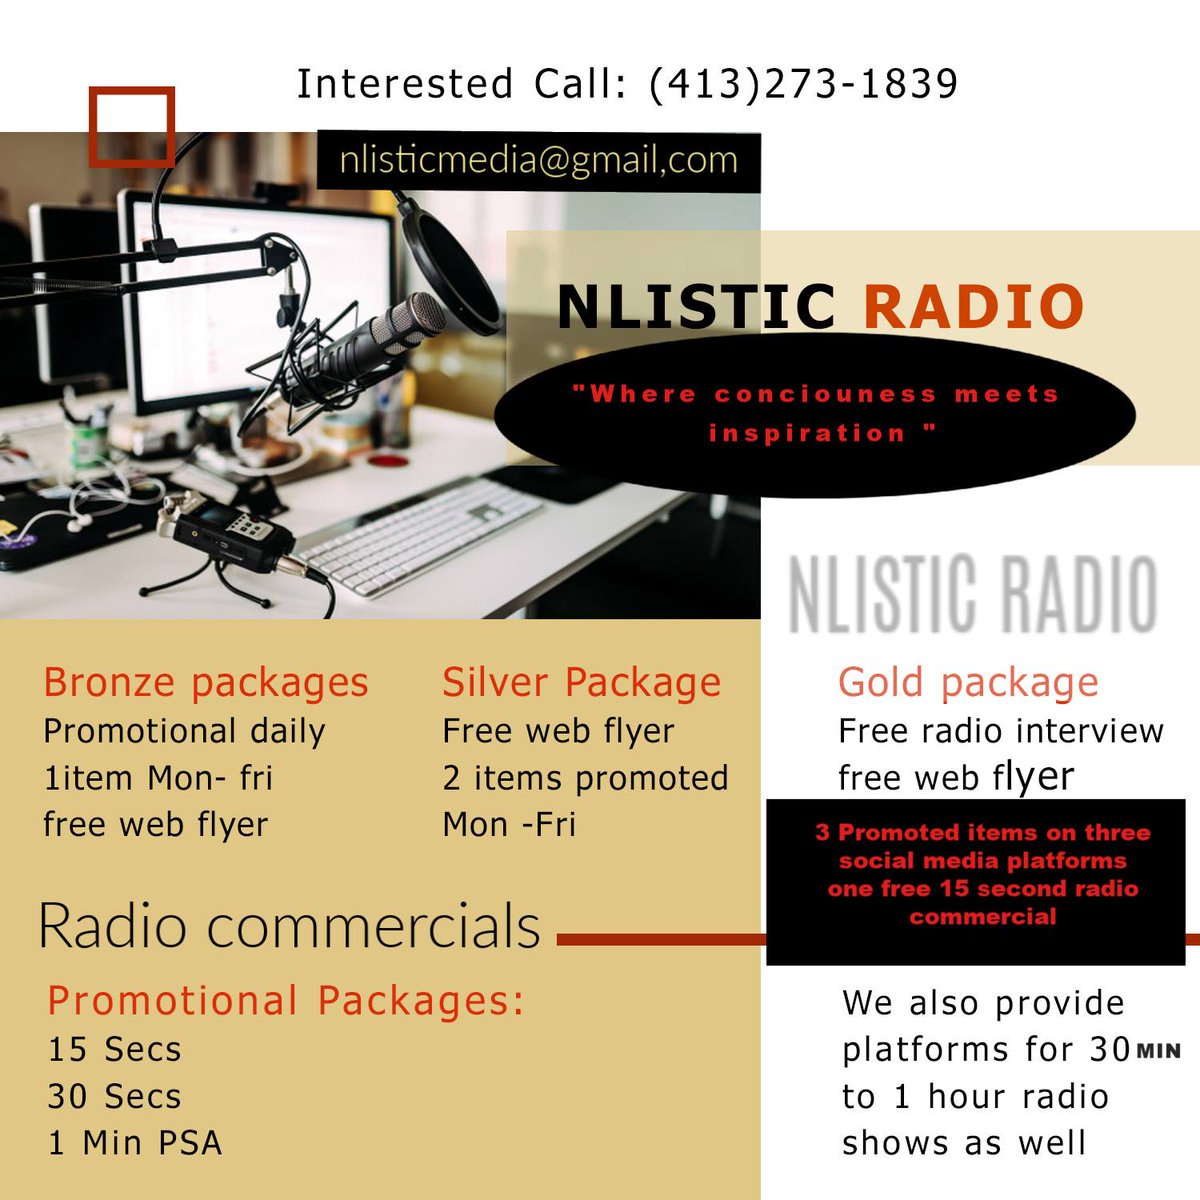 Need promotional services? Check out our packages, call or email for more information.
#NLISTICRADIO #radiopromotion #RadioMarketing #internetradio